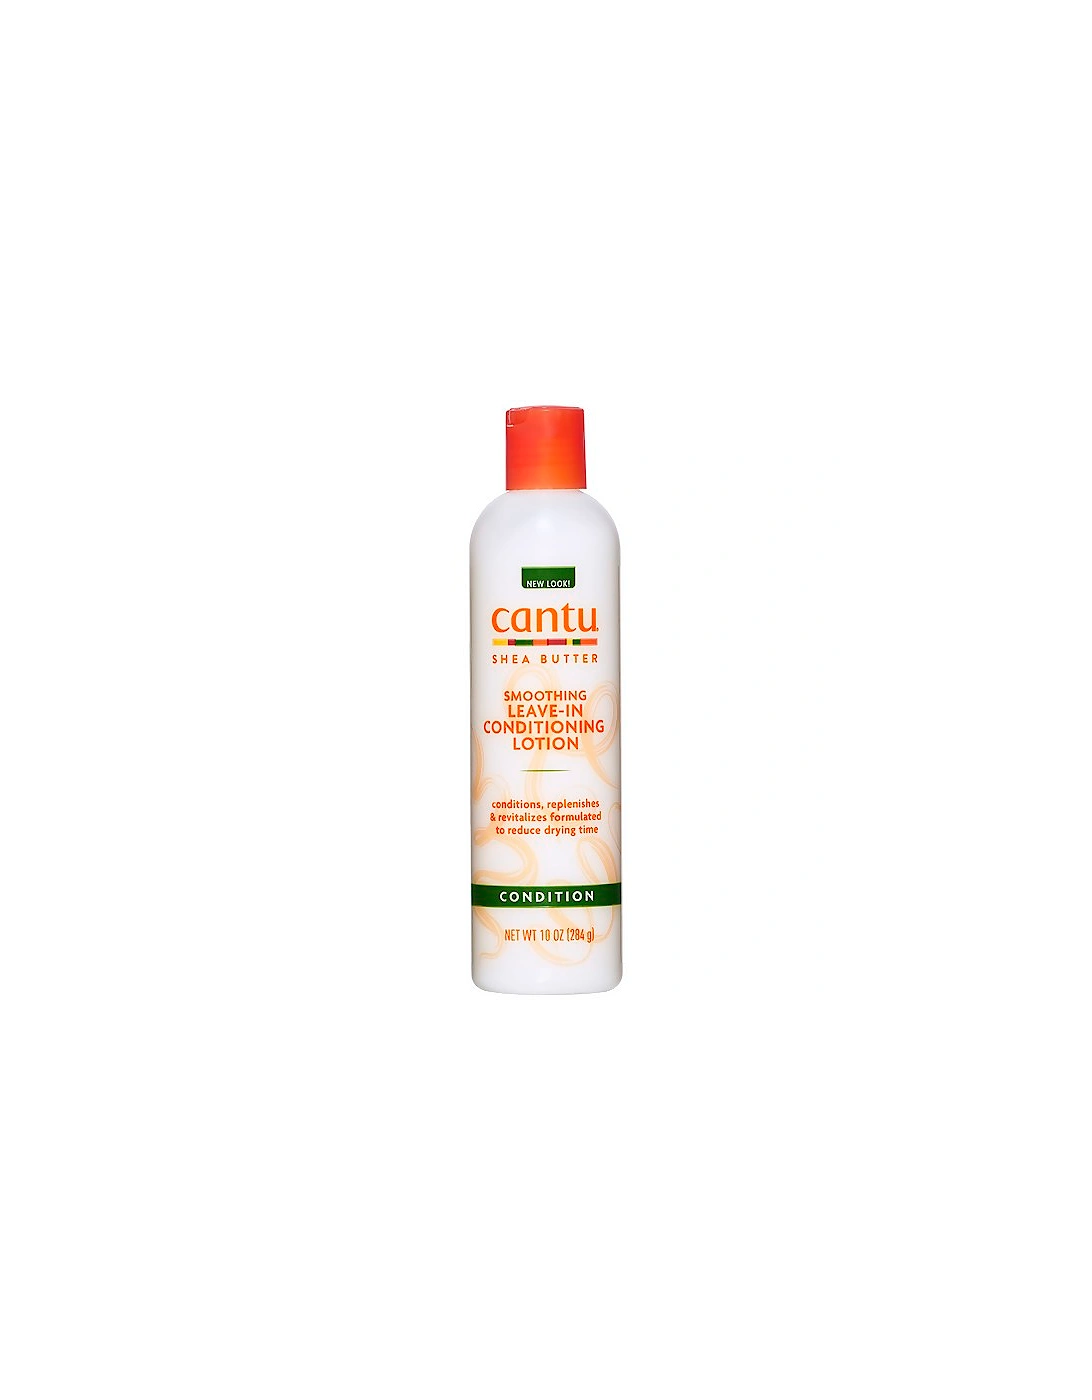 Shea Butter Smoothing Leave-In Conditioning Lotion - Cantu, 2 of 1